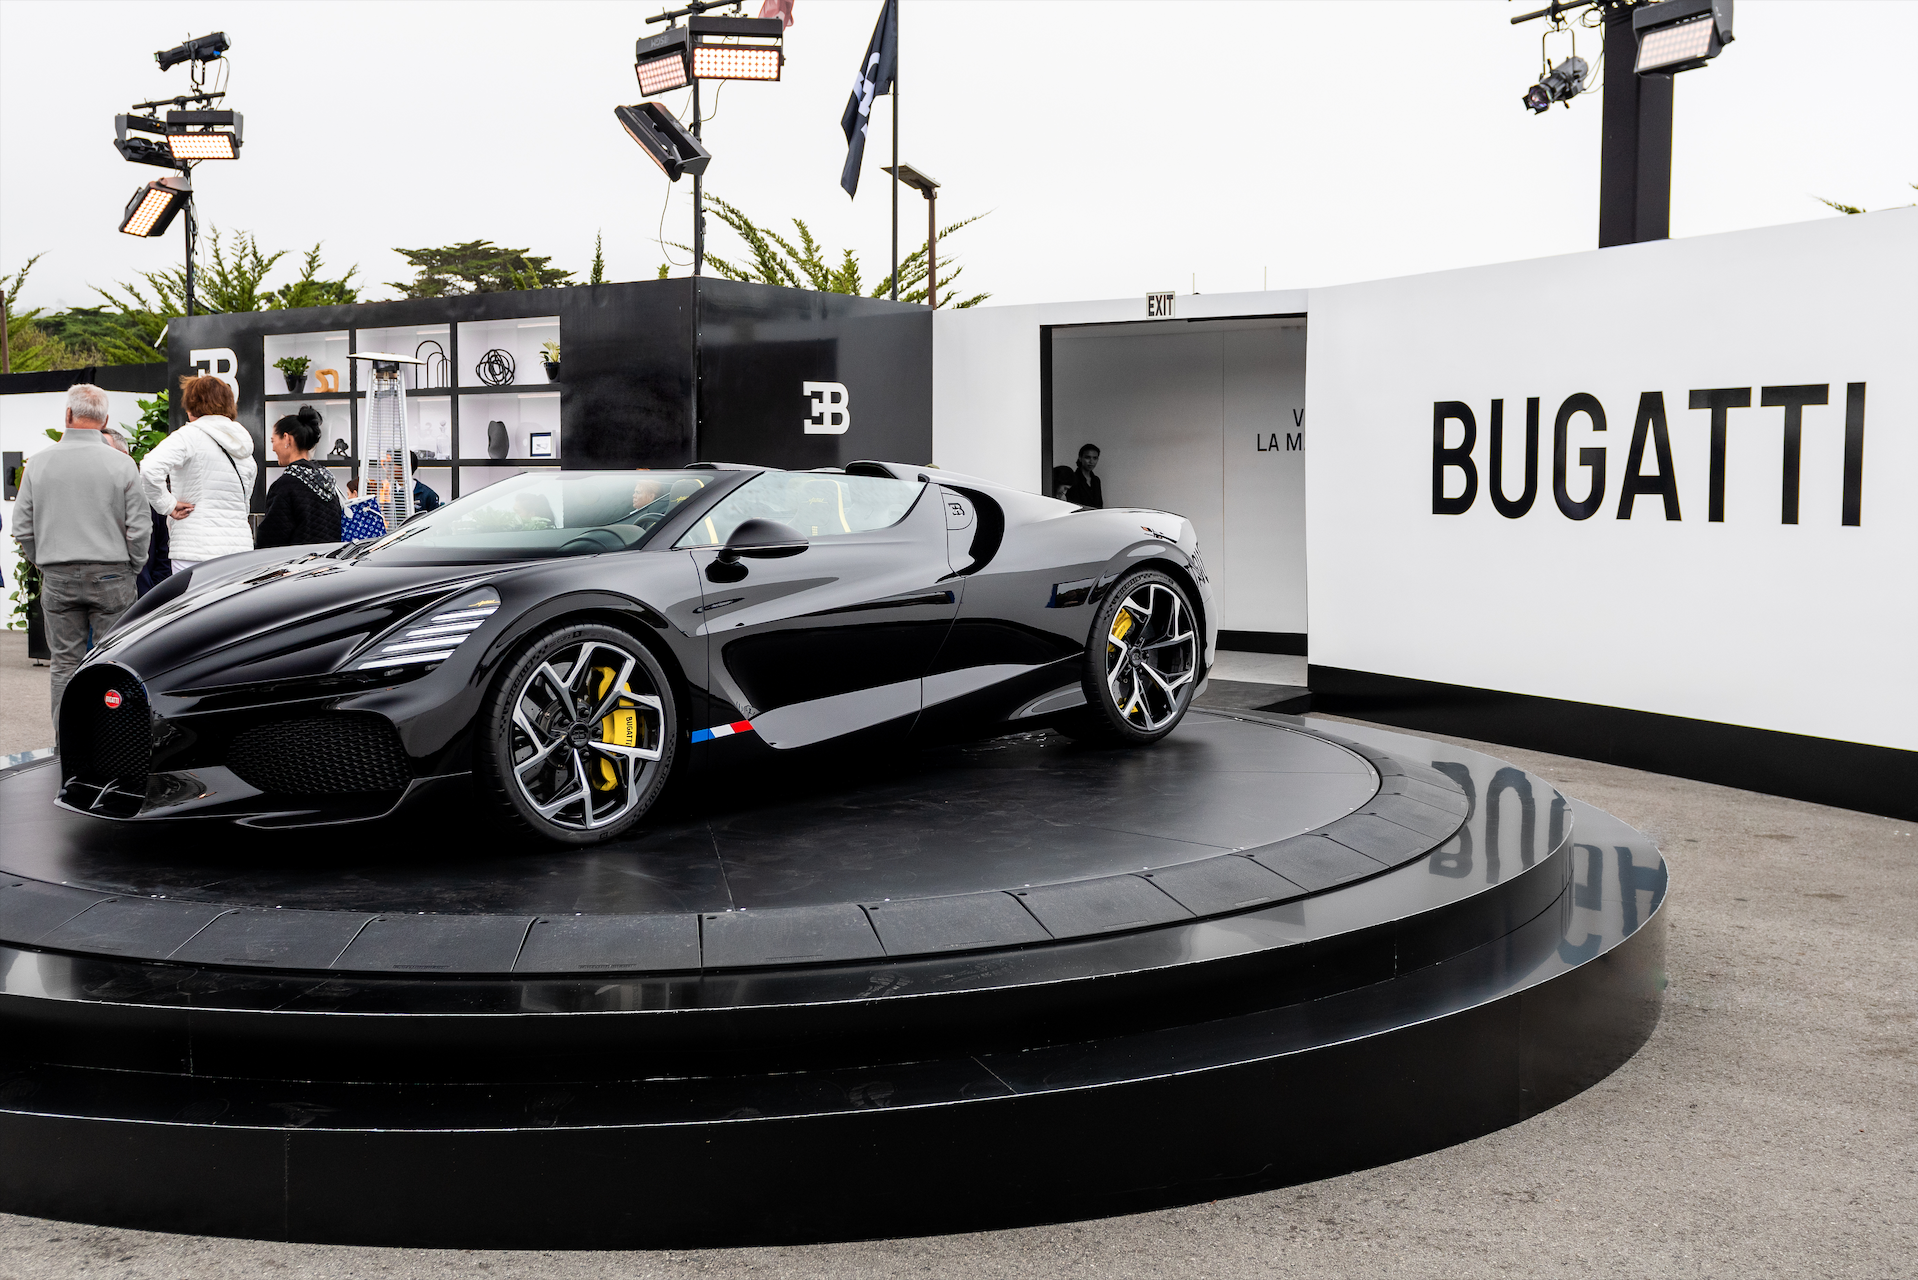 Bugatti Bolide makes spectacular public debut at 24 Hours of Le